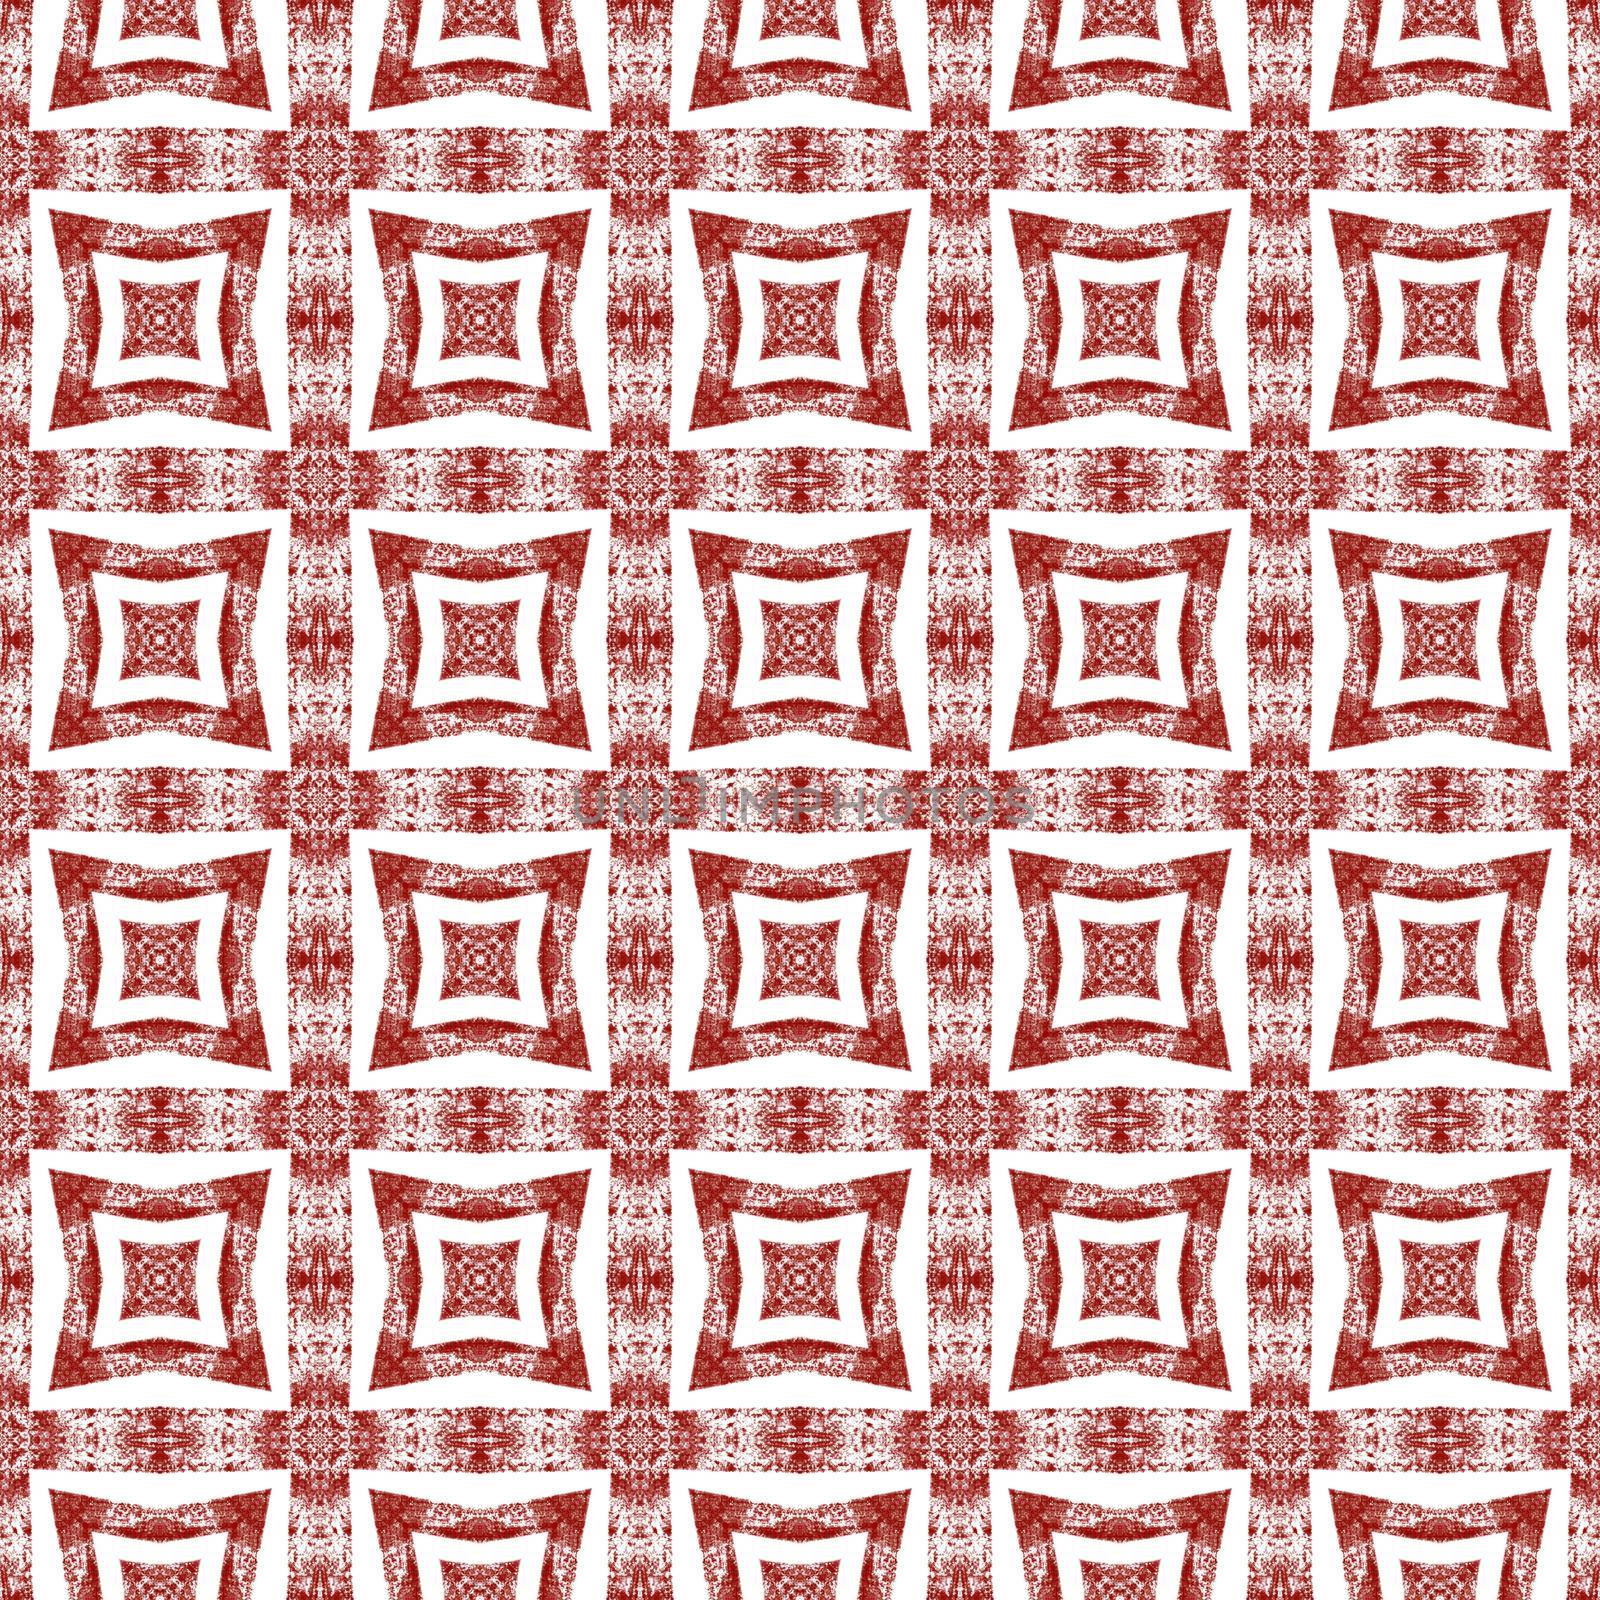 Tiled watercolor pattern. Wine red symmetrical kaleidoscope background. Hand painted tiled watercolor seamless. Textile ready likable print, swimwear fabric, wallpaper, wrapping.